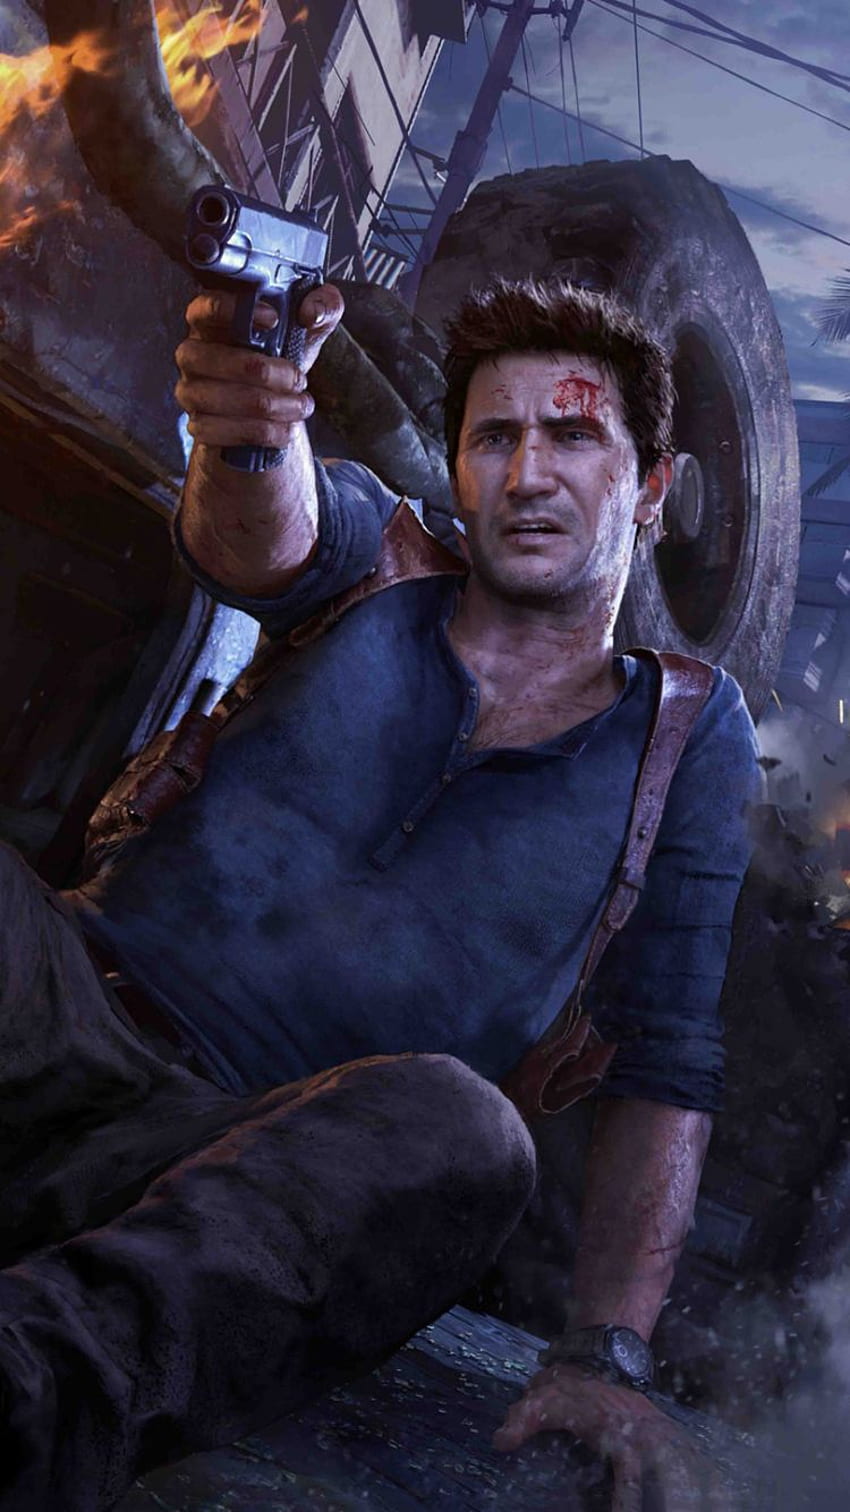 Uncharted 4 phone wallpaper for anyone interested   runcharted